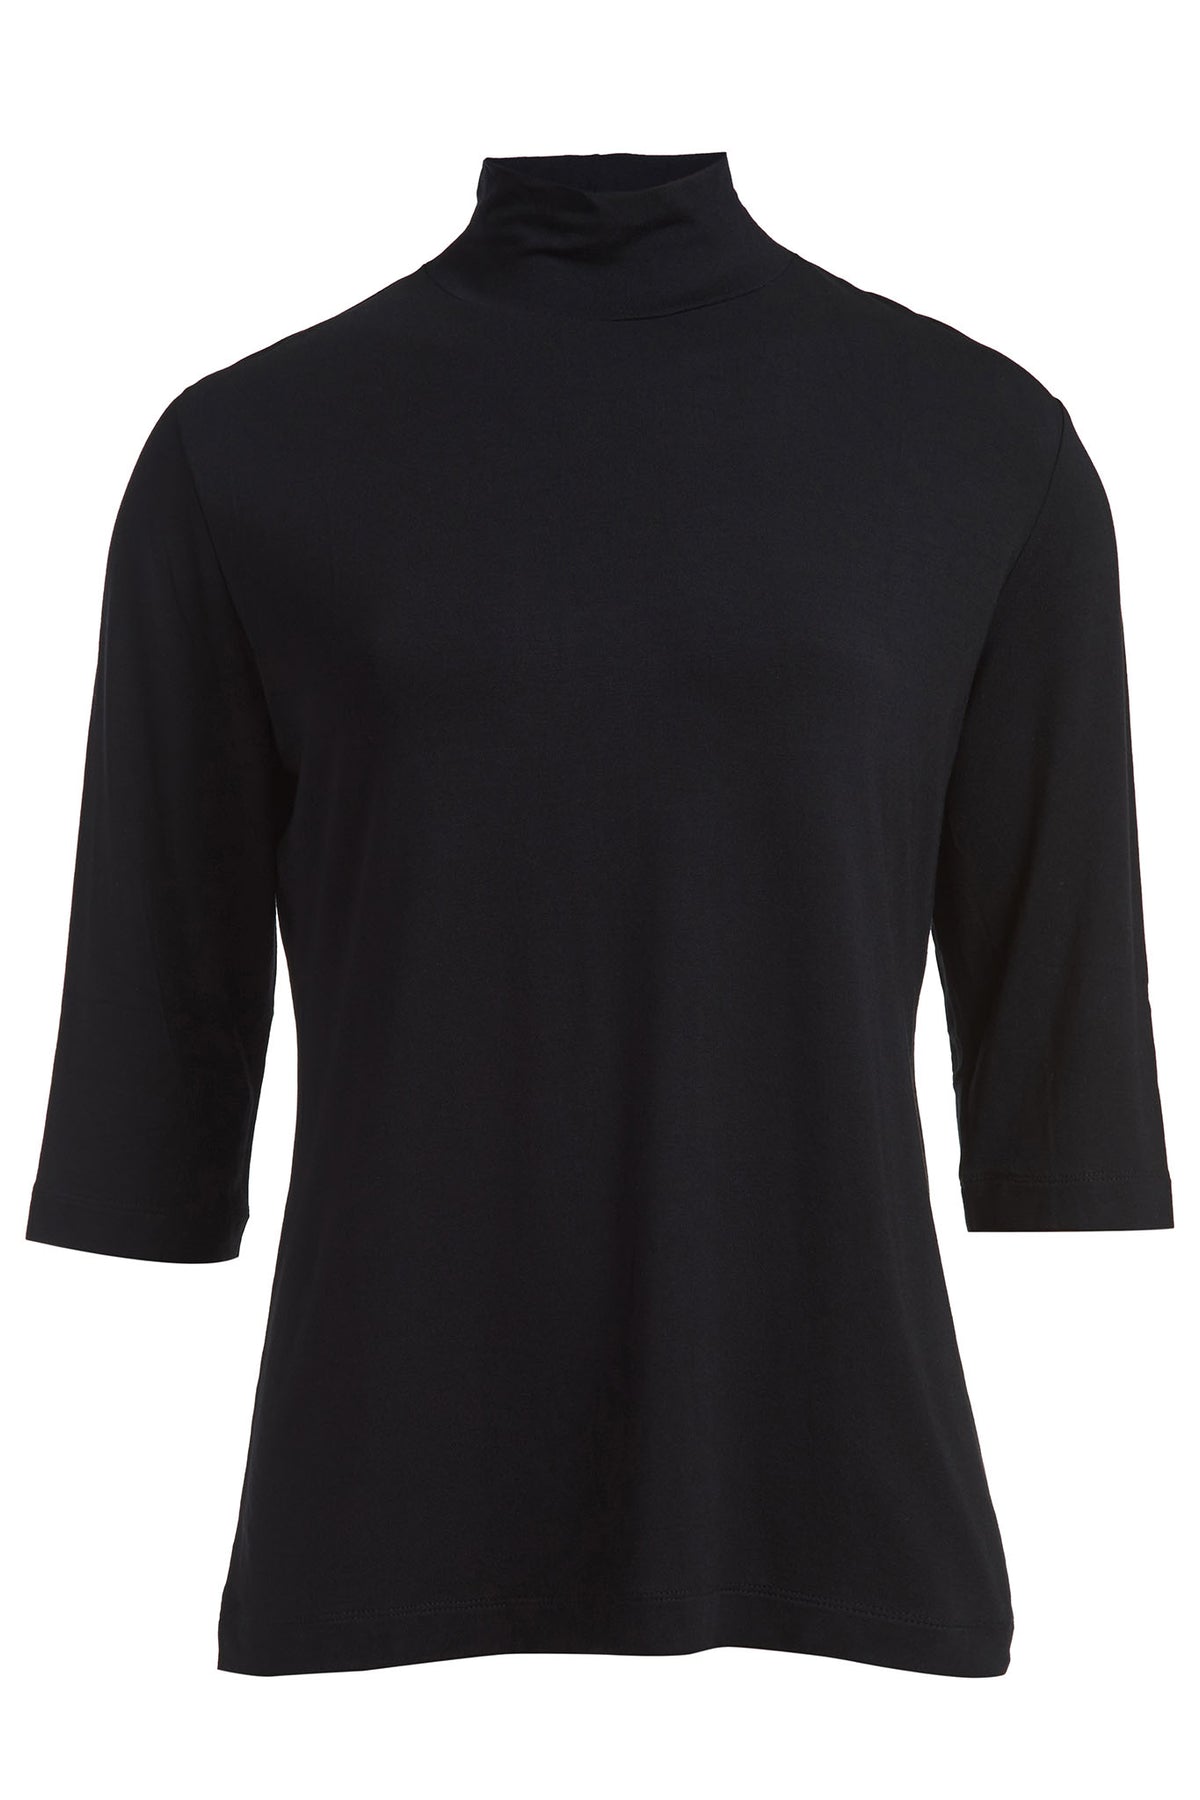 The Ludlow Perfect Mock Neck Tee – DuetteNYC